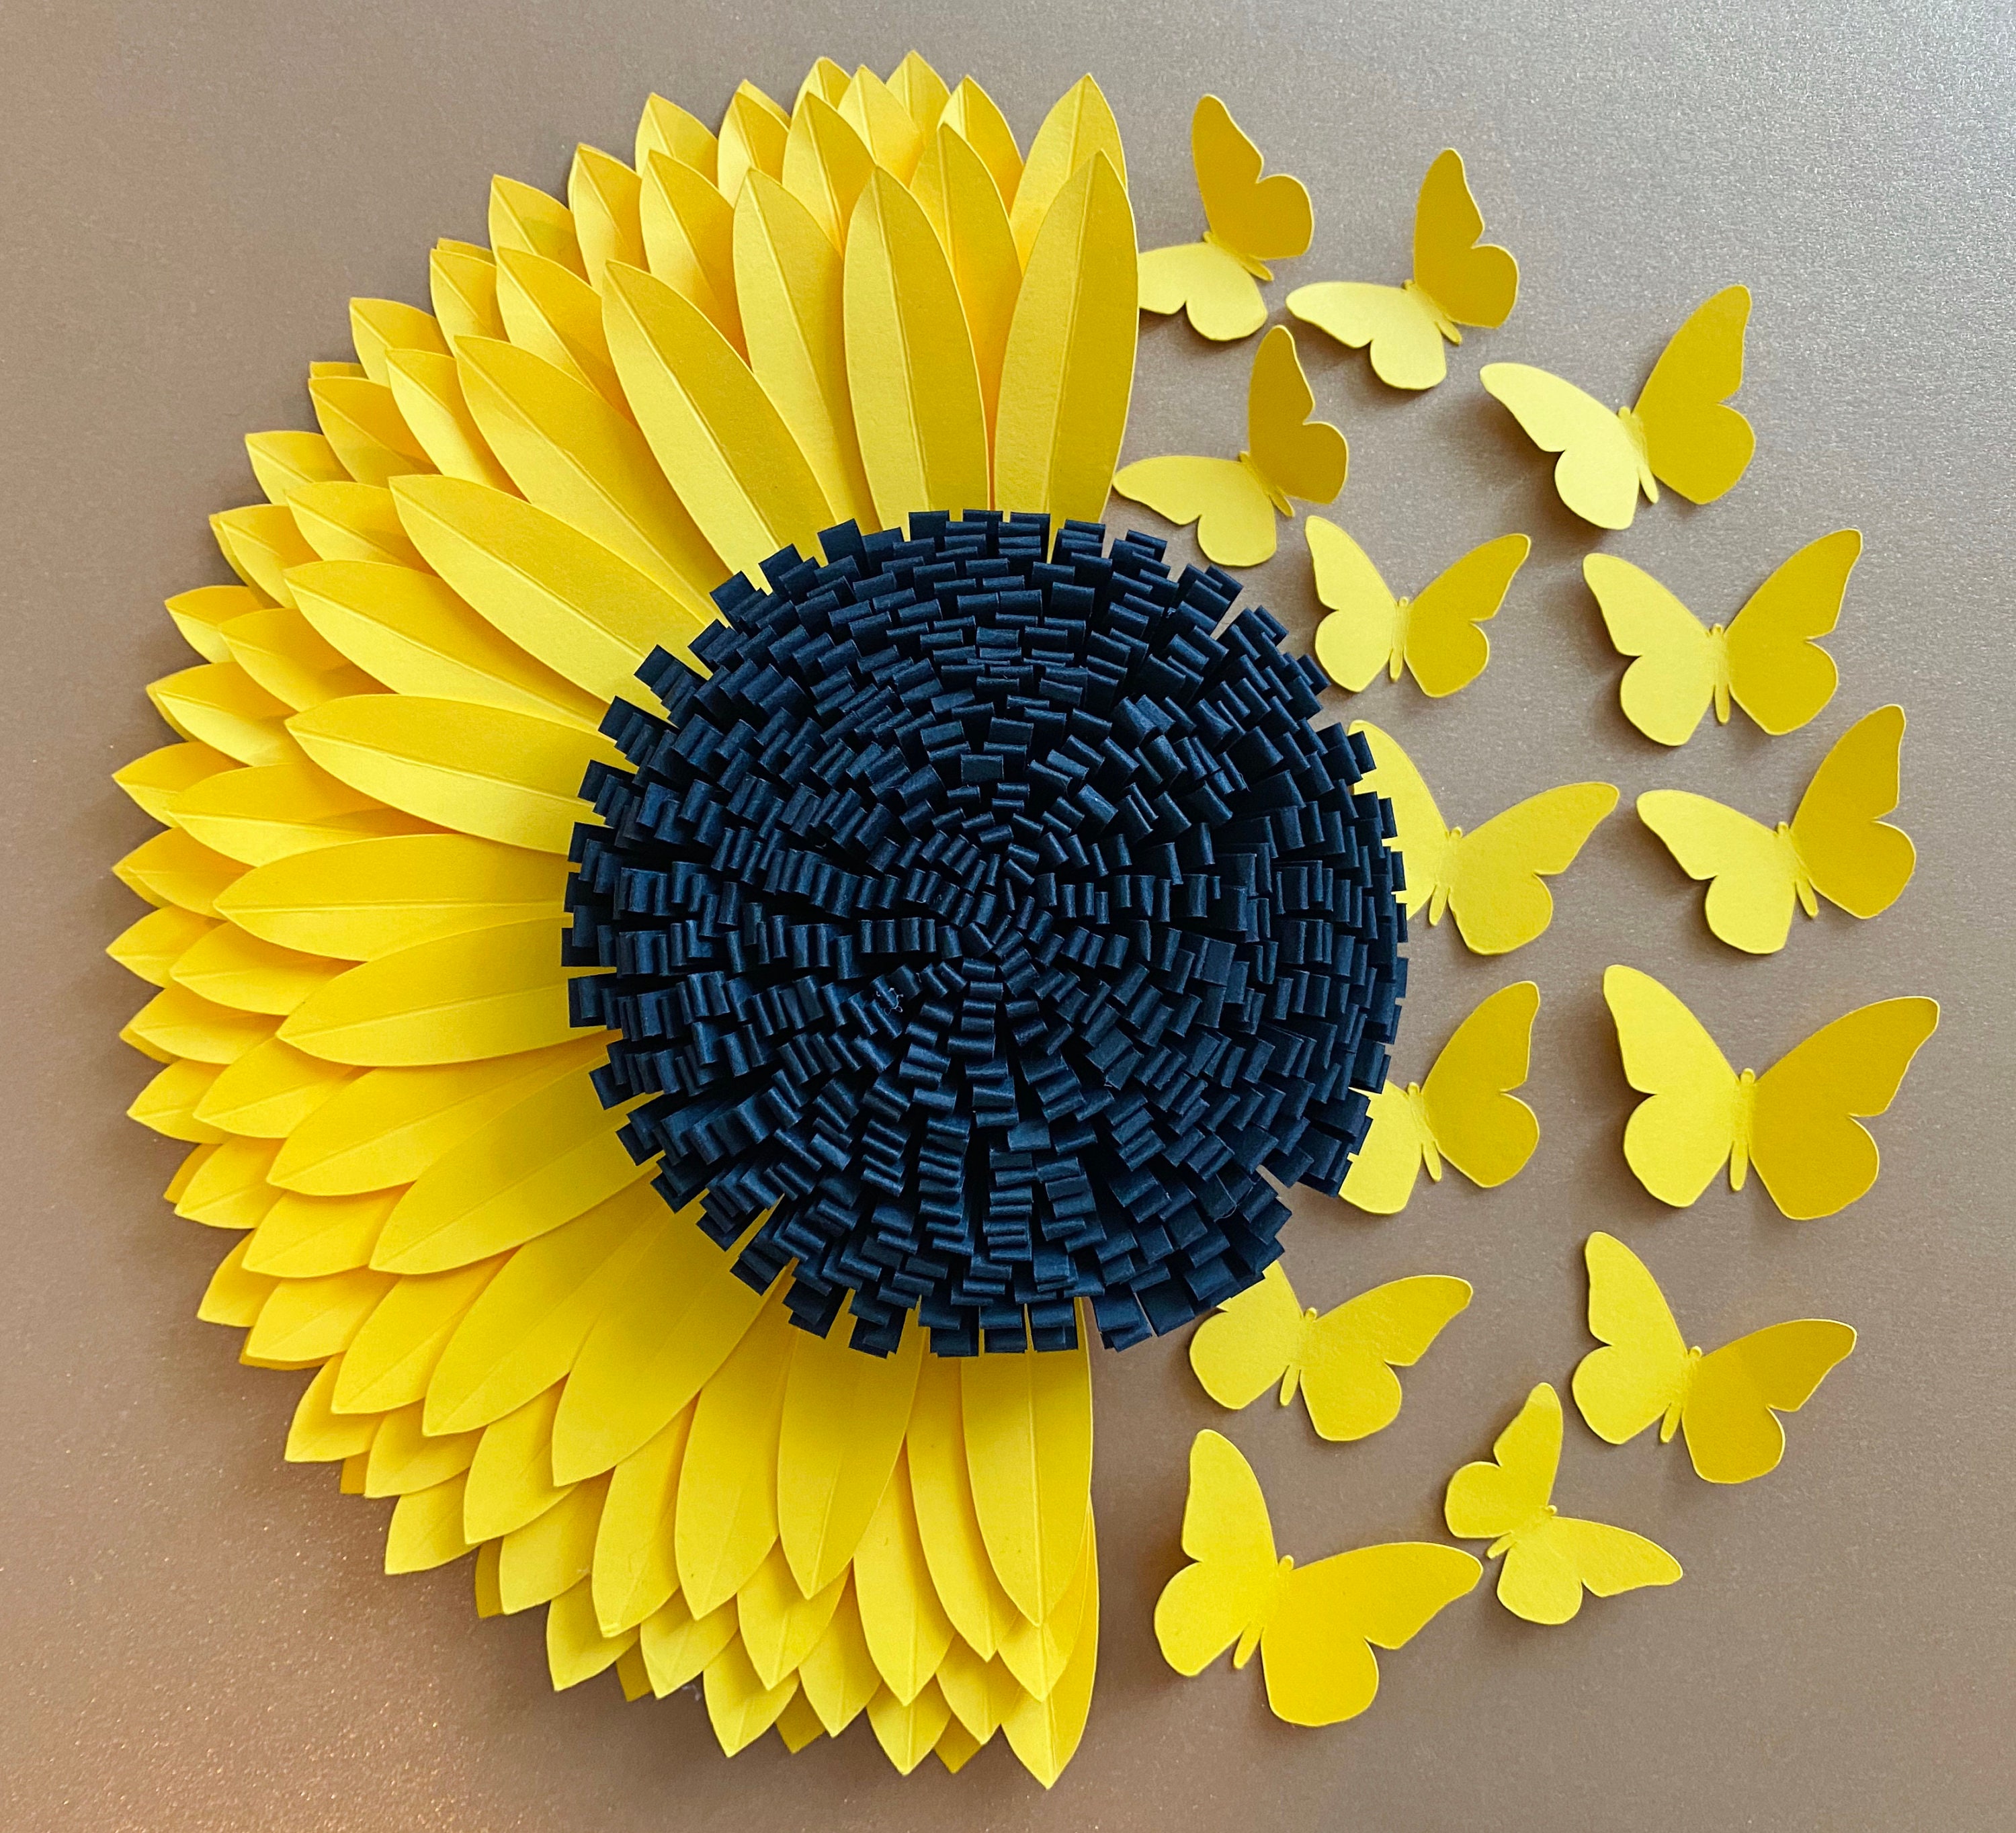 12 Pcs Floral Paper Flowers Decorations for Wall Monogram Sign Decorations Sunflower Yellow 3D Flowers for Party Photo Backdrops, Classrooms Walls, BR